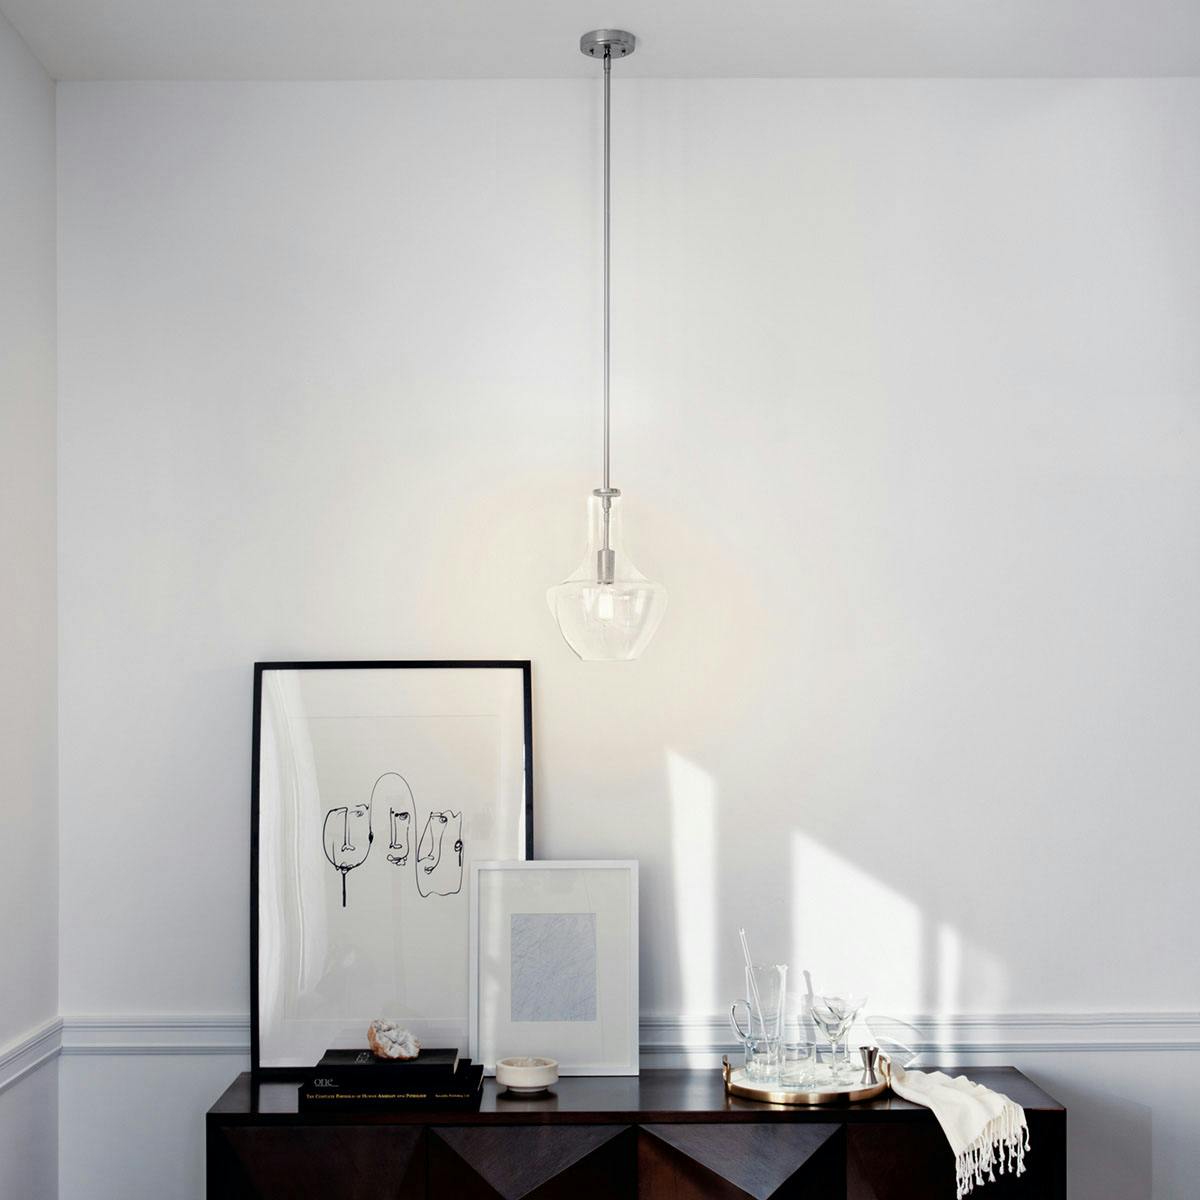 Day time Hallway image featuring Everly pendant 42141NICS